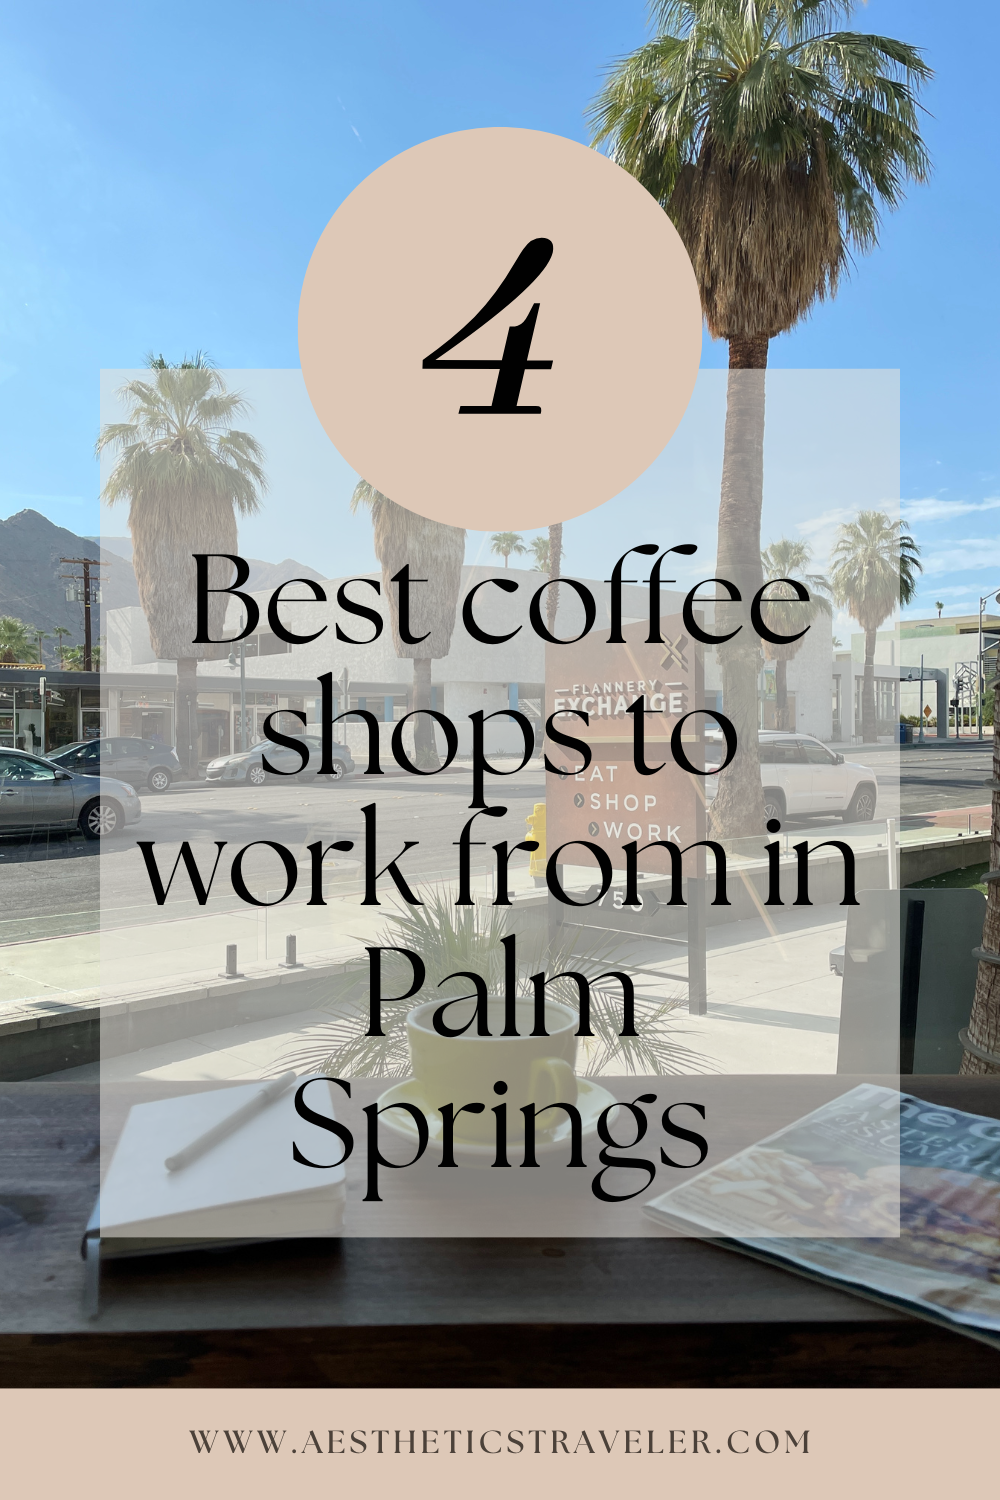 The Best Coffee Shops To Work From In Palm Springs, CA | www.aestheticstraveler.com Travel & Design Editorial